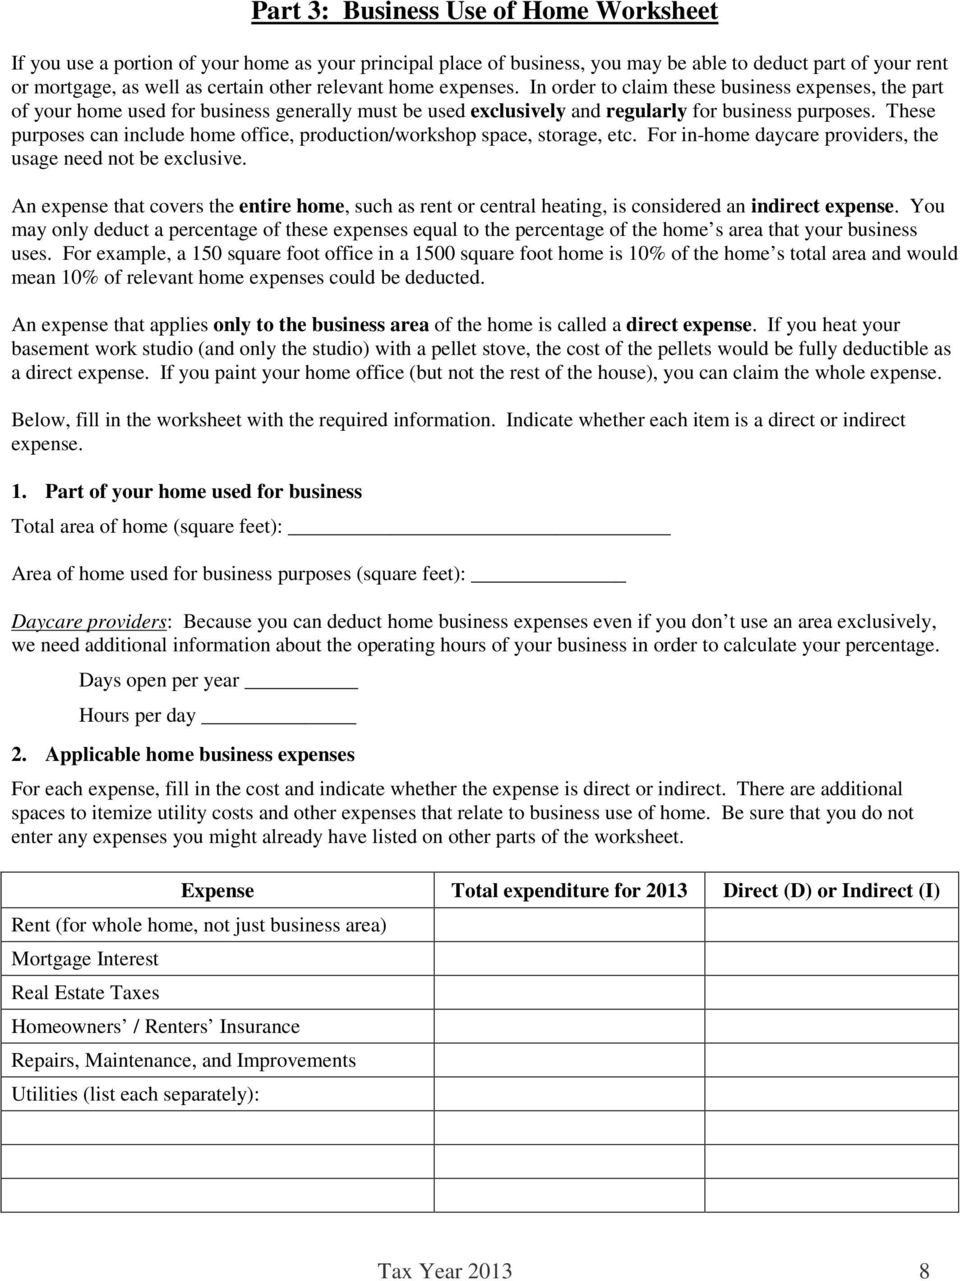 Home Daycare Tax Worksheet Schedule C Worksheet for Self Employed Filers and